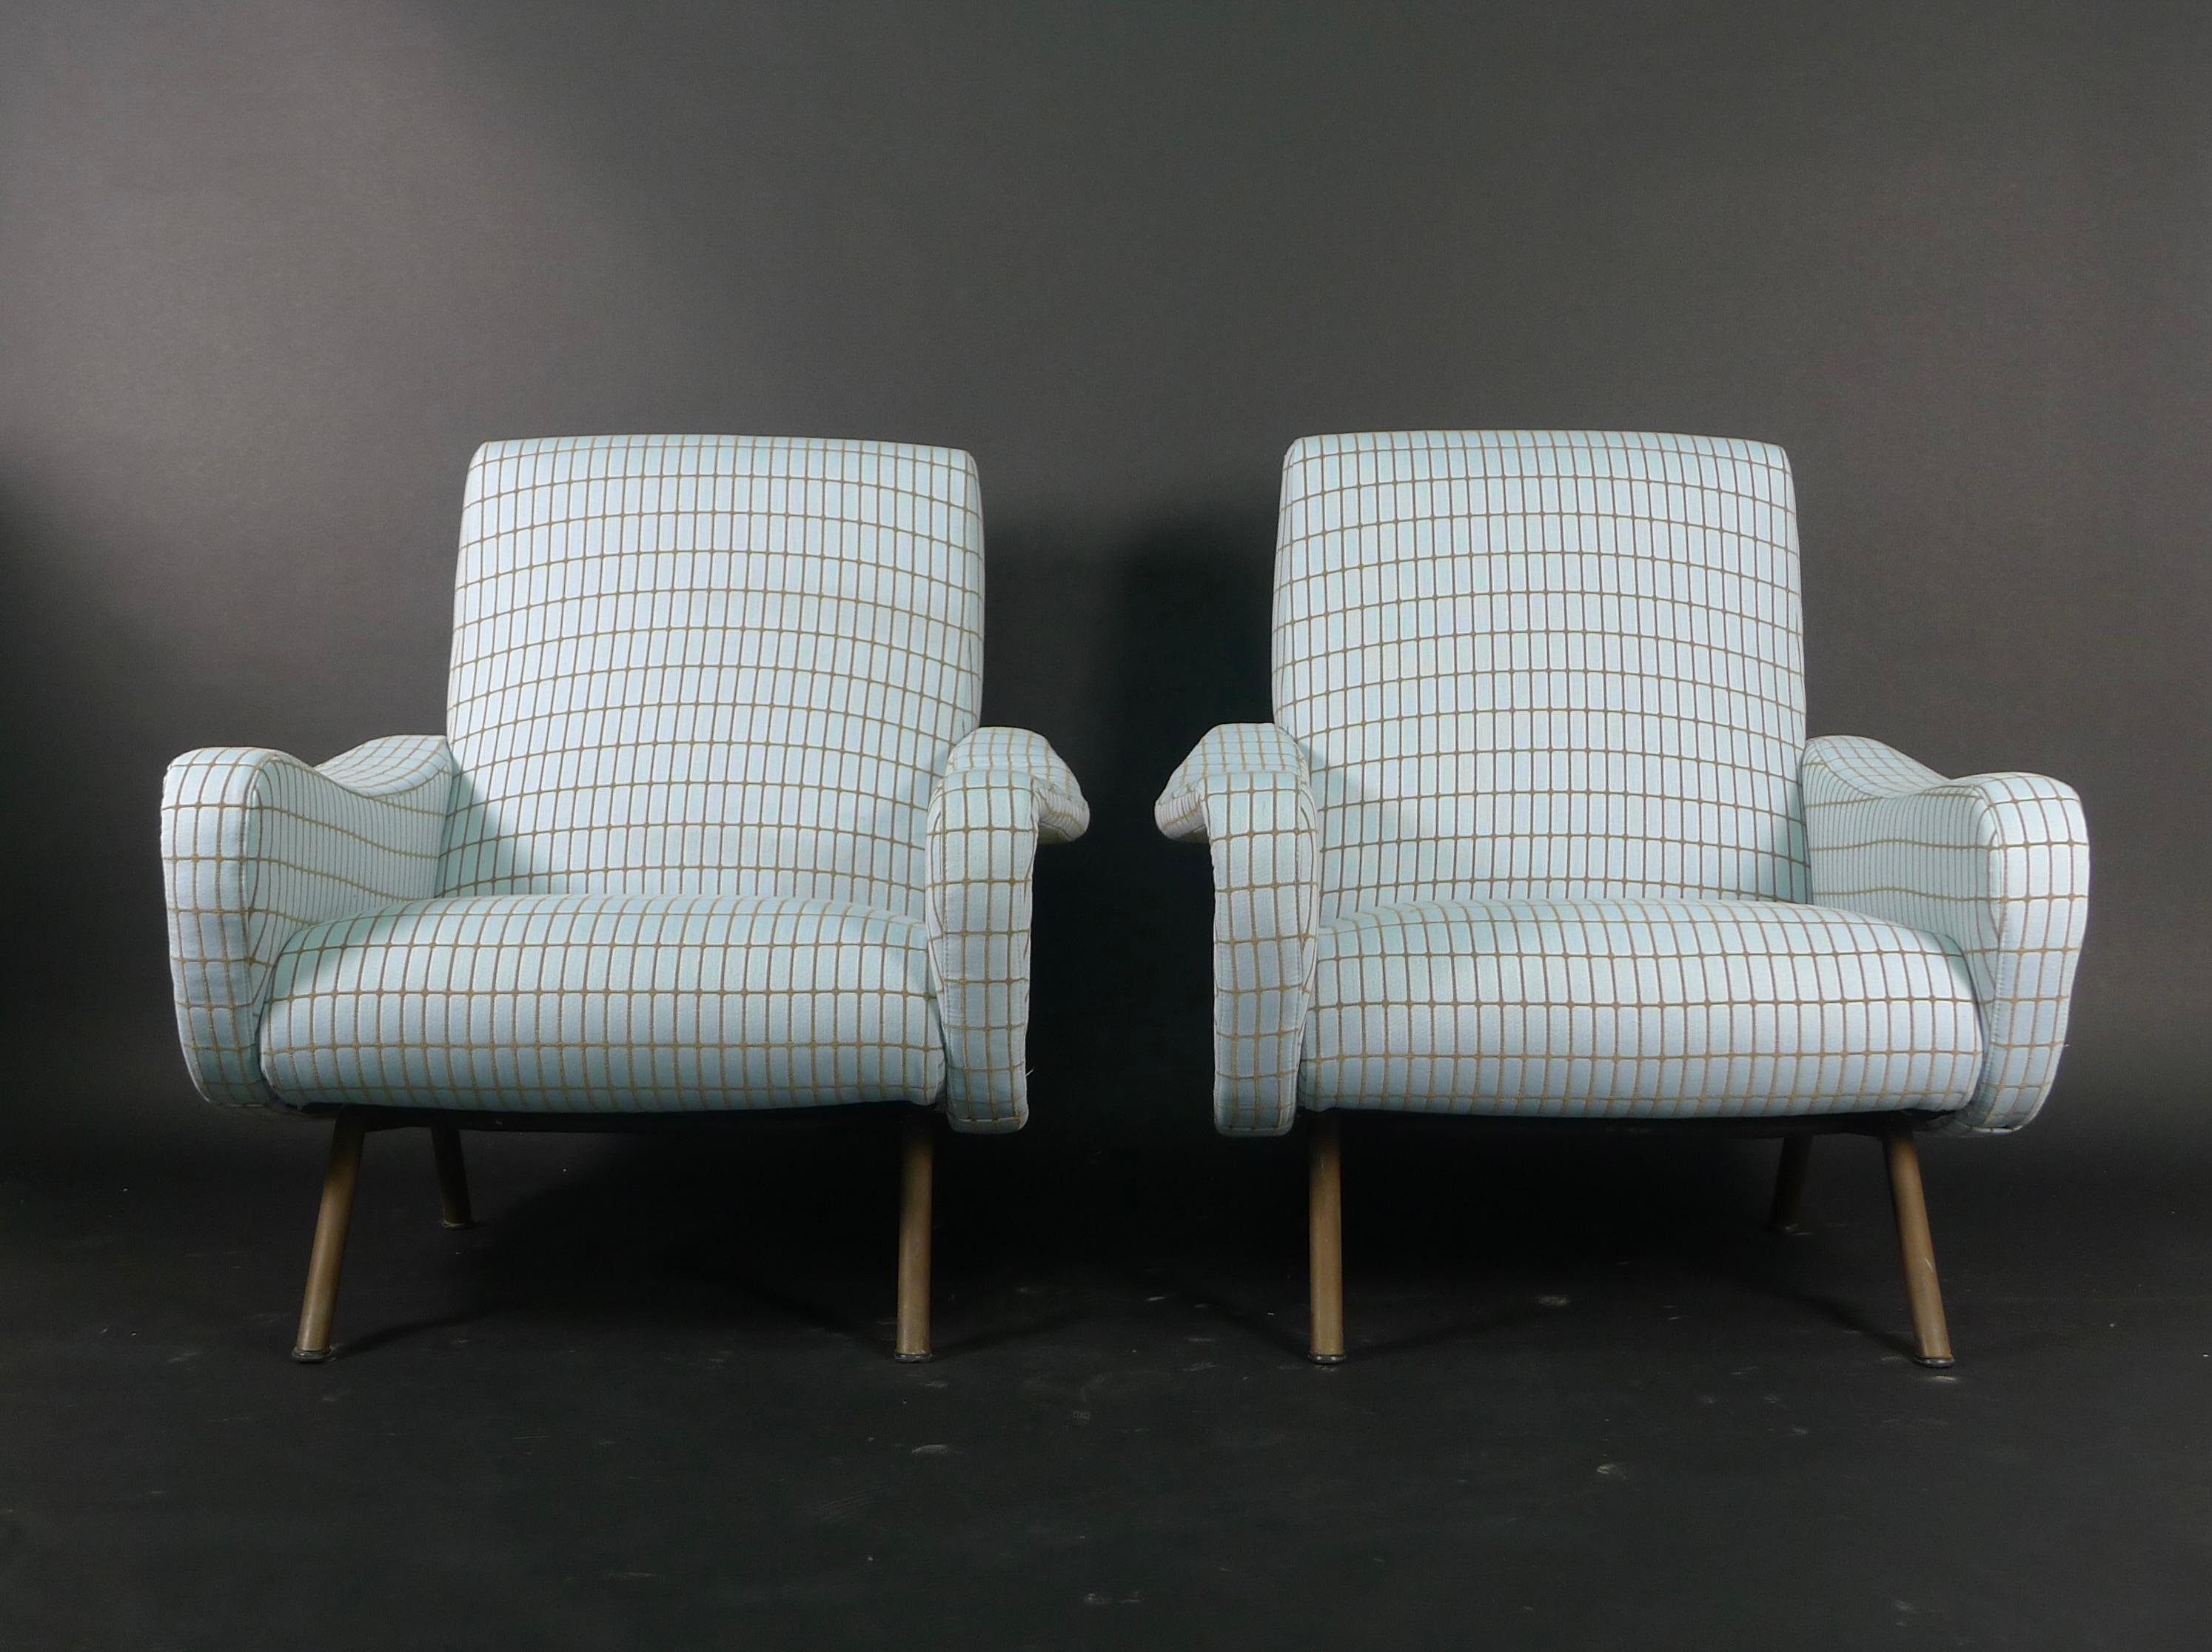 Italian Marco Zanuso, Pair of Lady Chairs, 1950s, Made by Arflex, Italy, Reupholstered